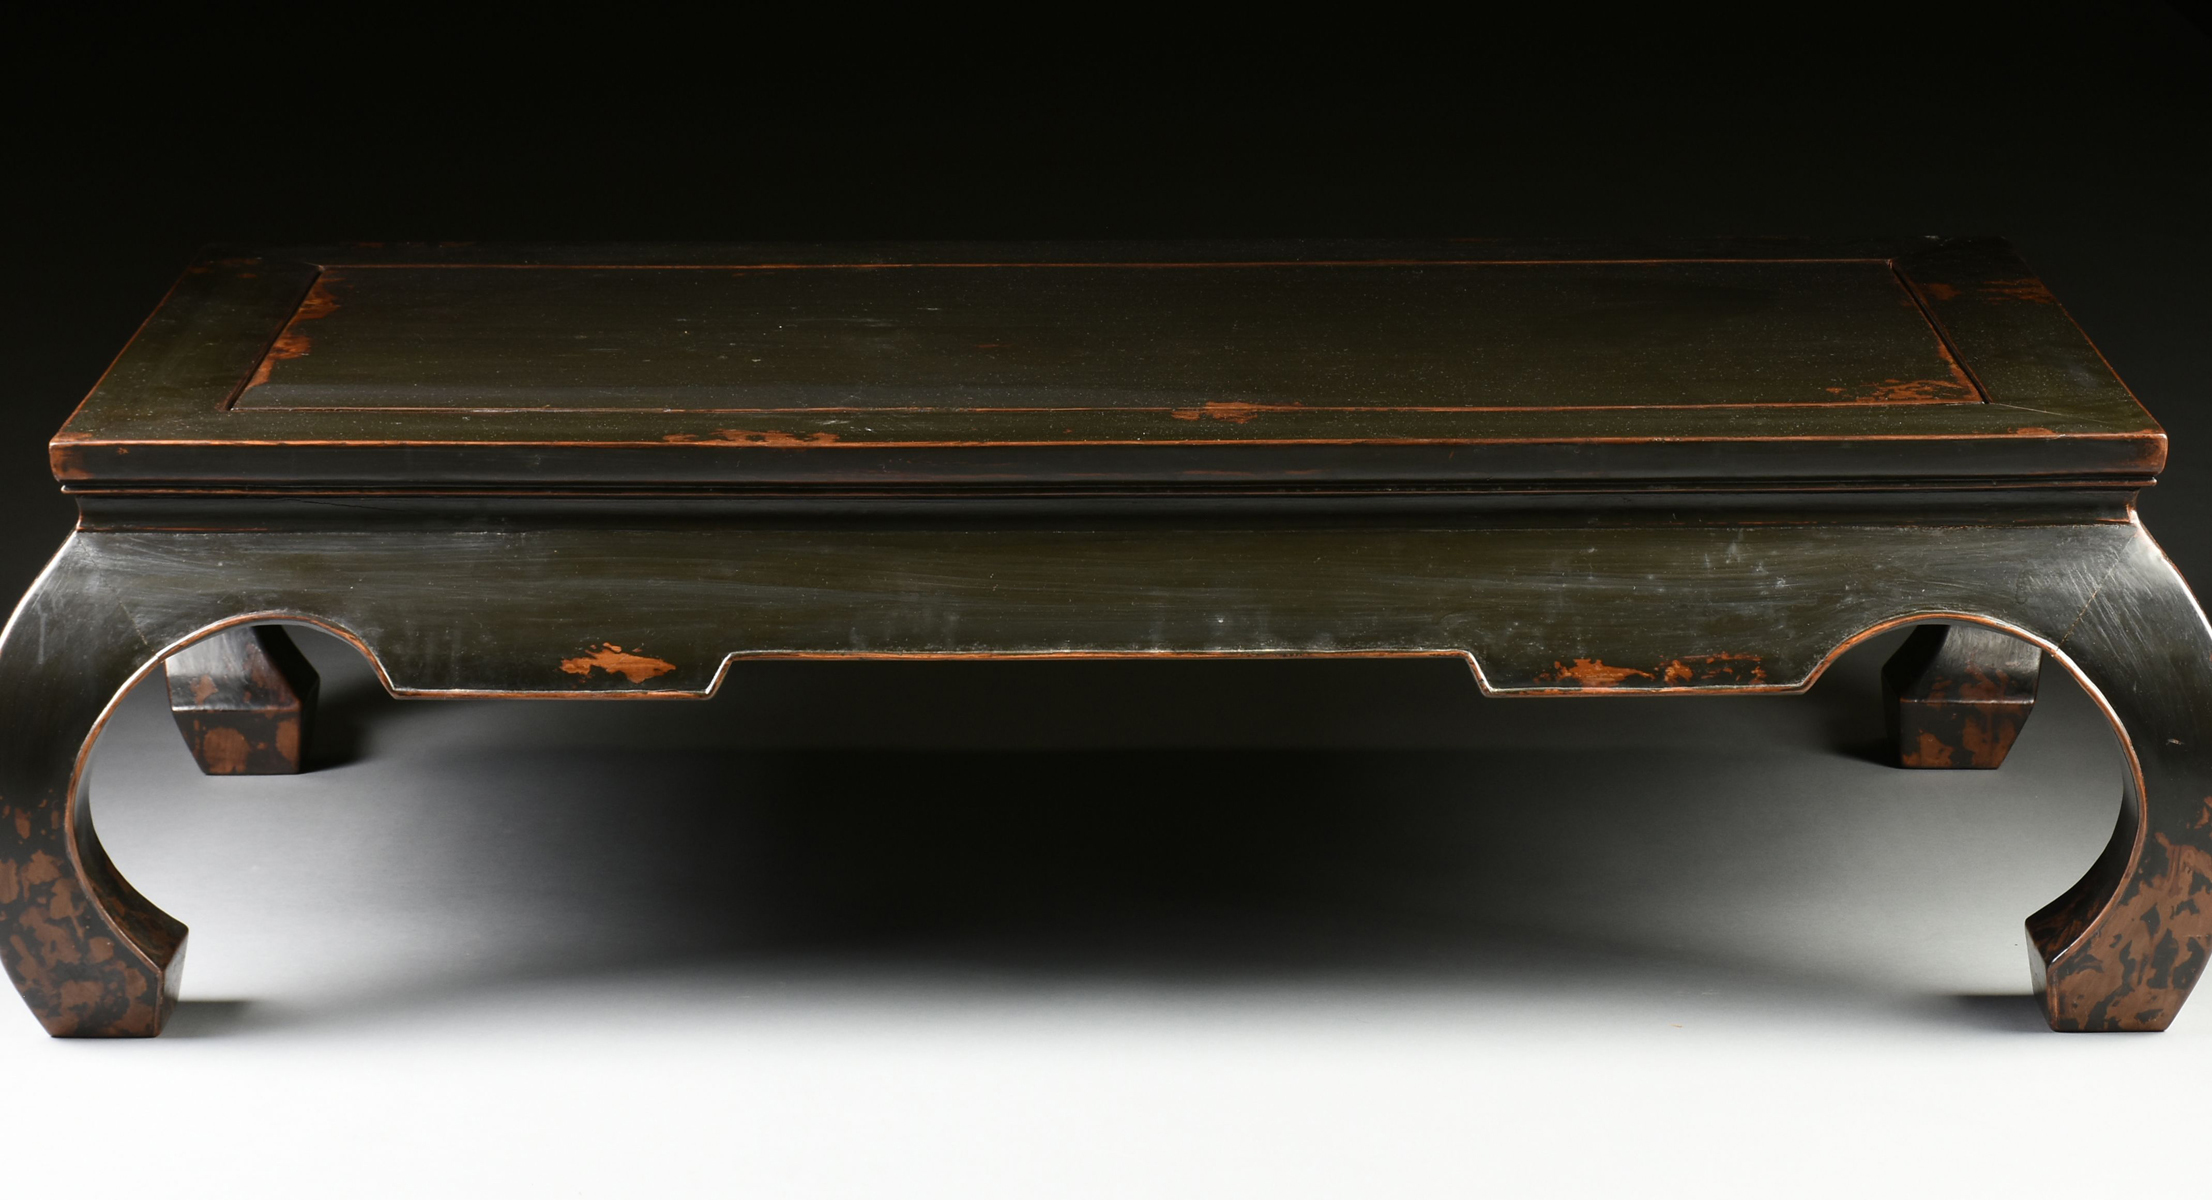 A CHINESE CHARCOAL BLACK LACQUERED WOOD COFFEE TABLE, MODERN, with a rectangular floating panel - Image 6 of 7